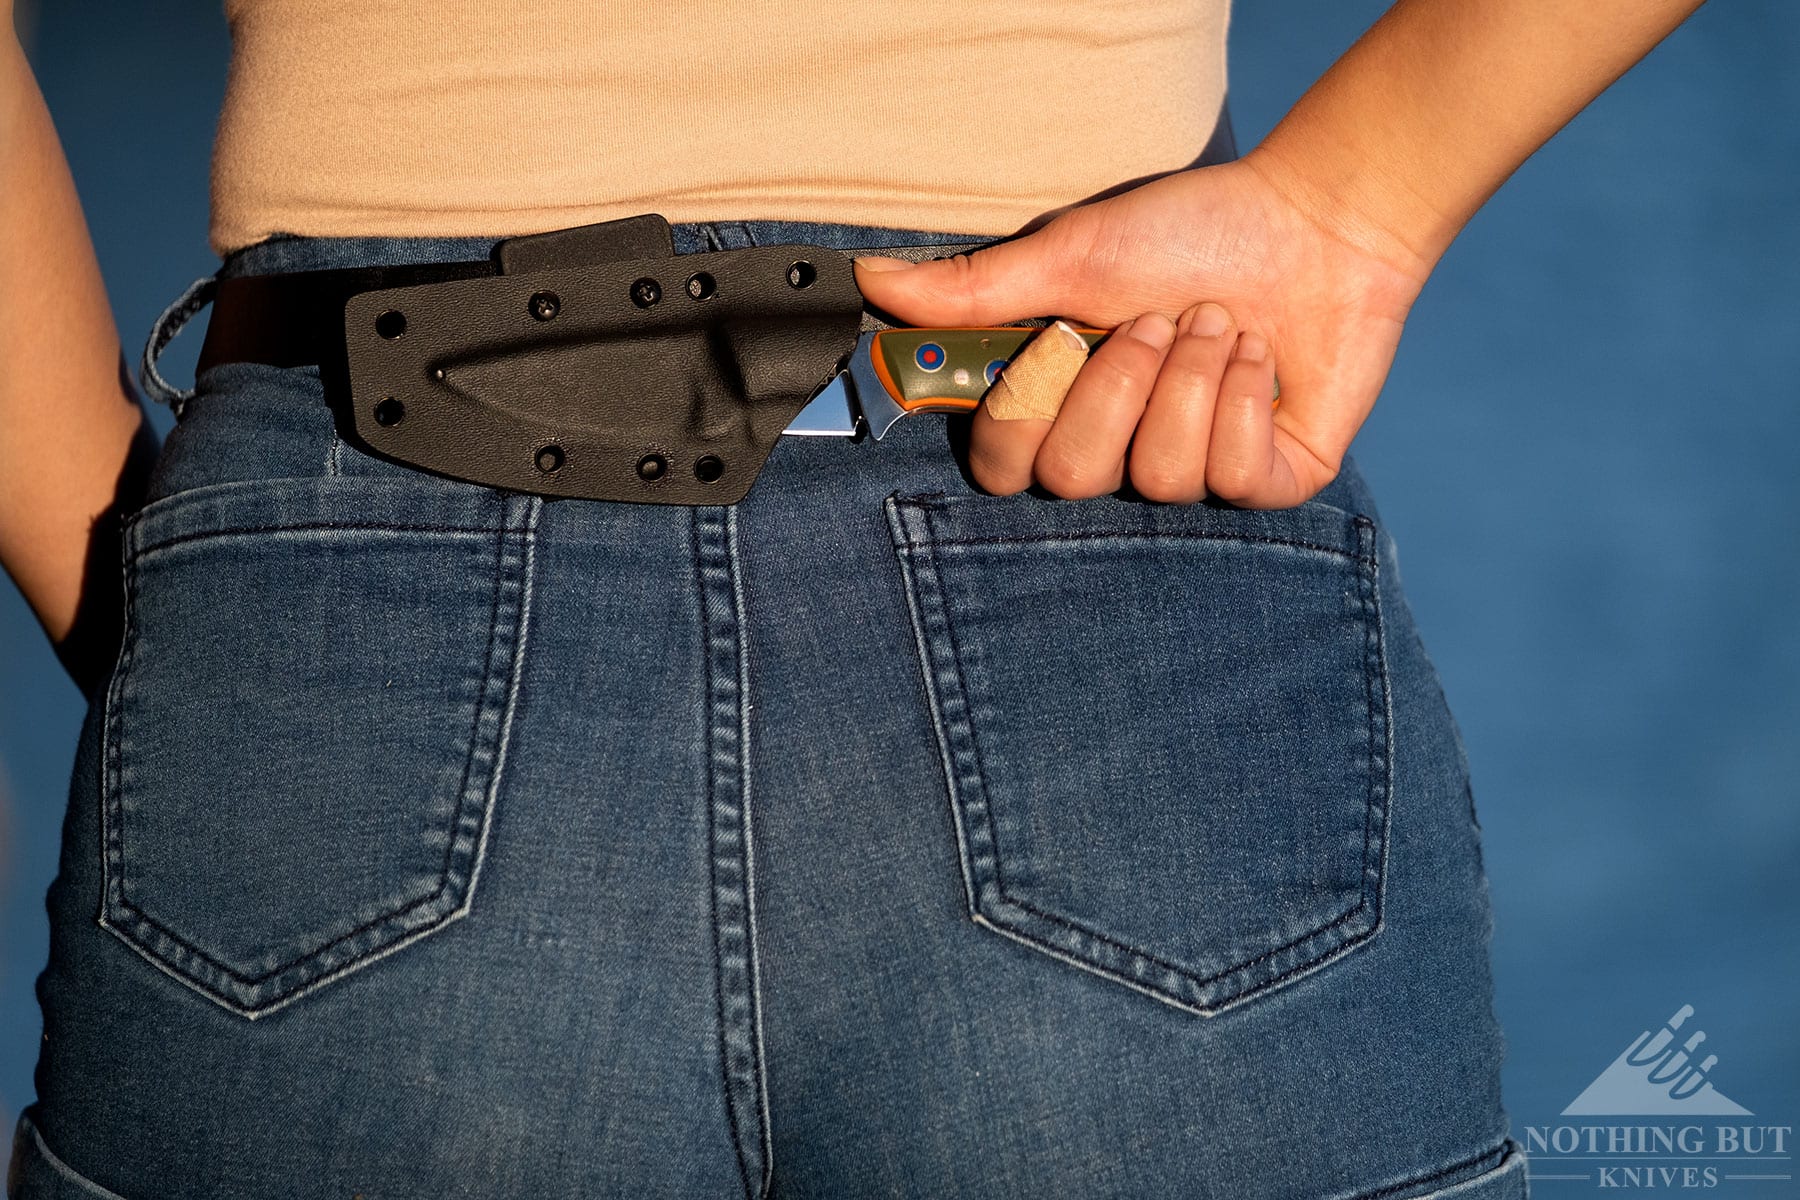 The Boker Plus Brook EDC fixed blade knife being deployed from its sheath in the scout carry position on a person's waist.